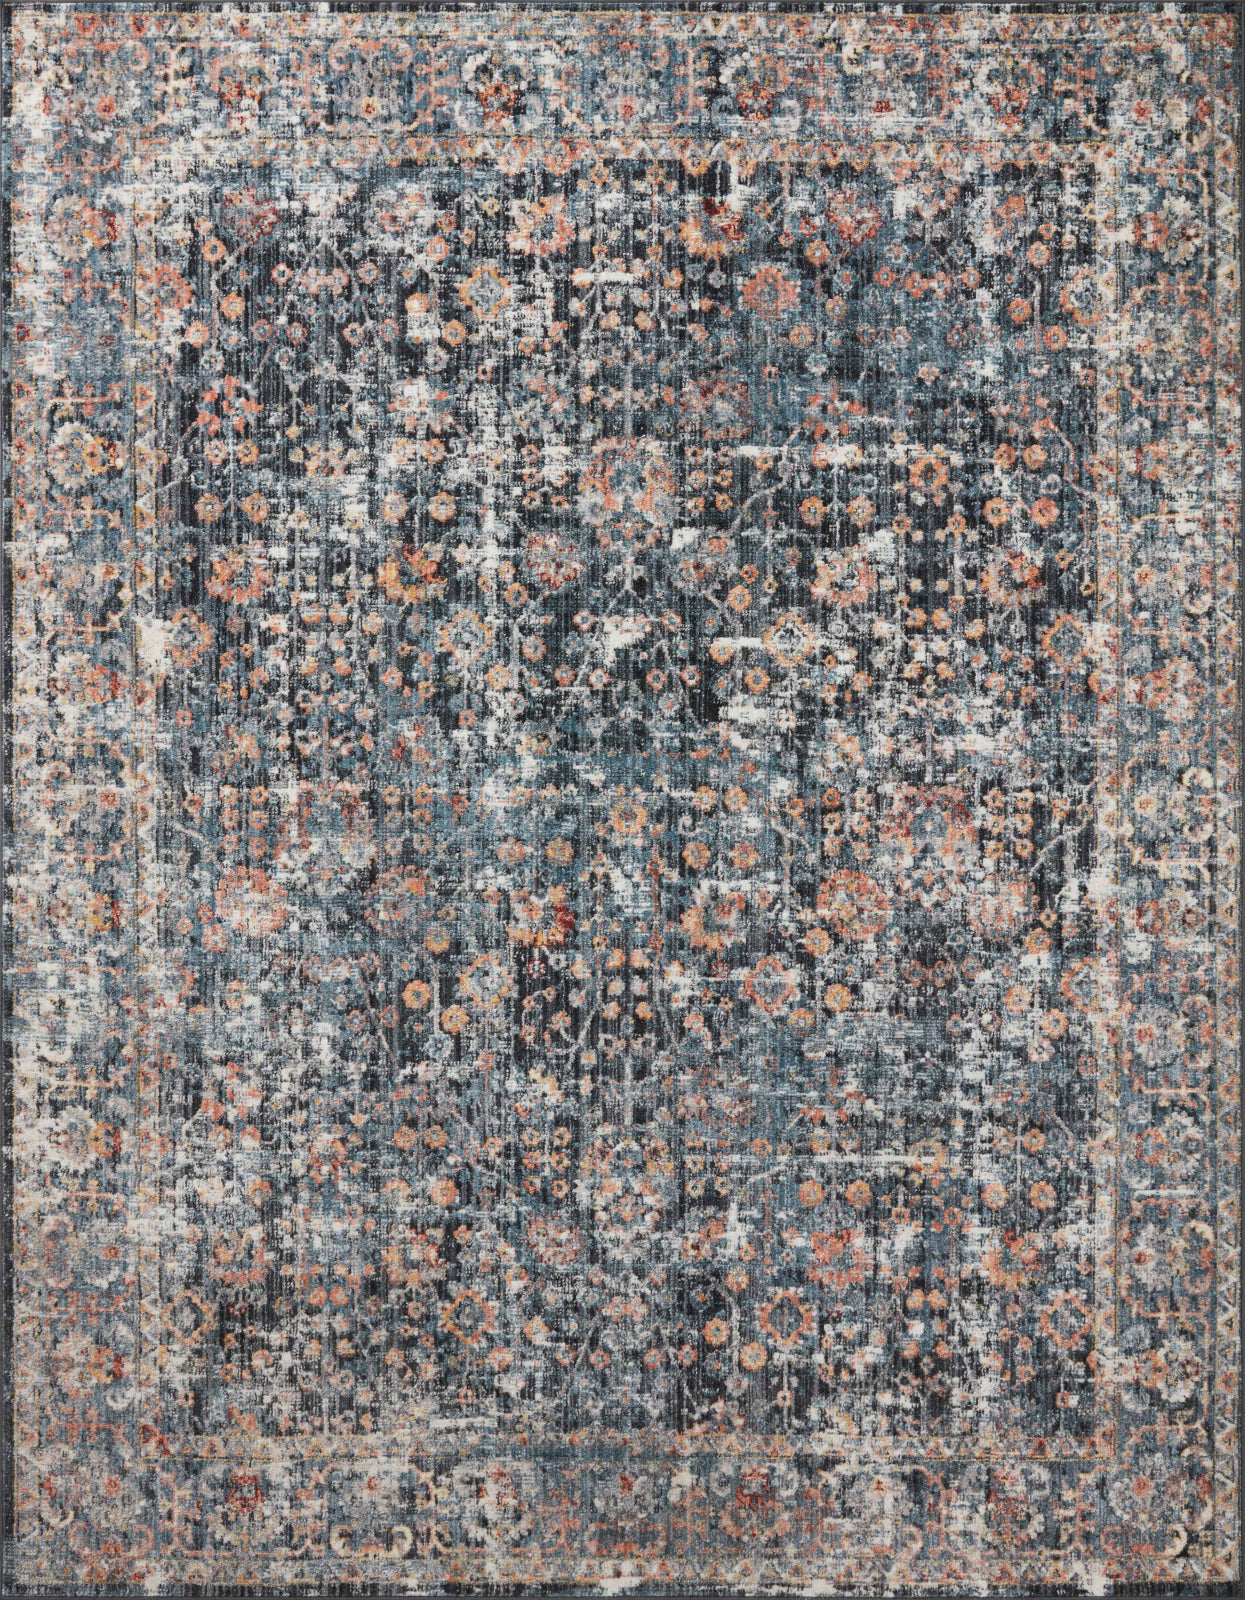 Loloi Isle IE-09 Brown/Black Area Rug – Incredible Rugs and Decor